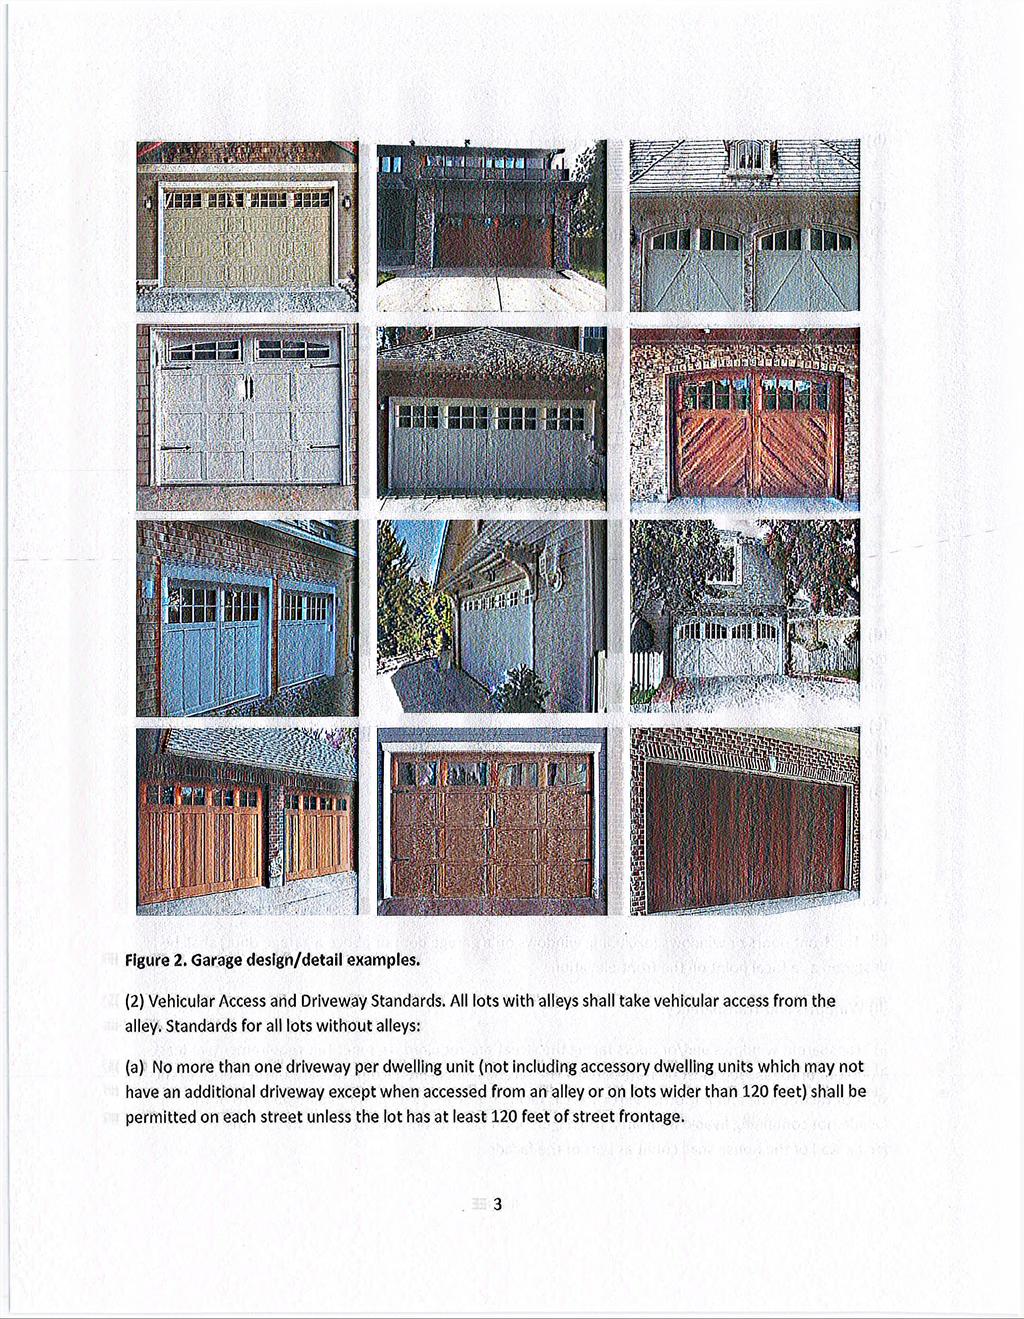 Figure 2. Garage design/detail examples. (2) Vehicular Access and Driveway Standards. All lots with alleys shall take vehicular access from the alley.